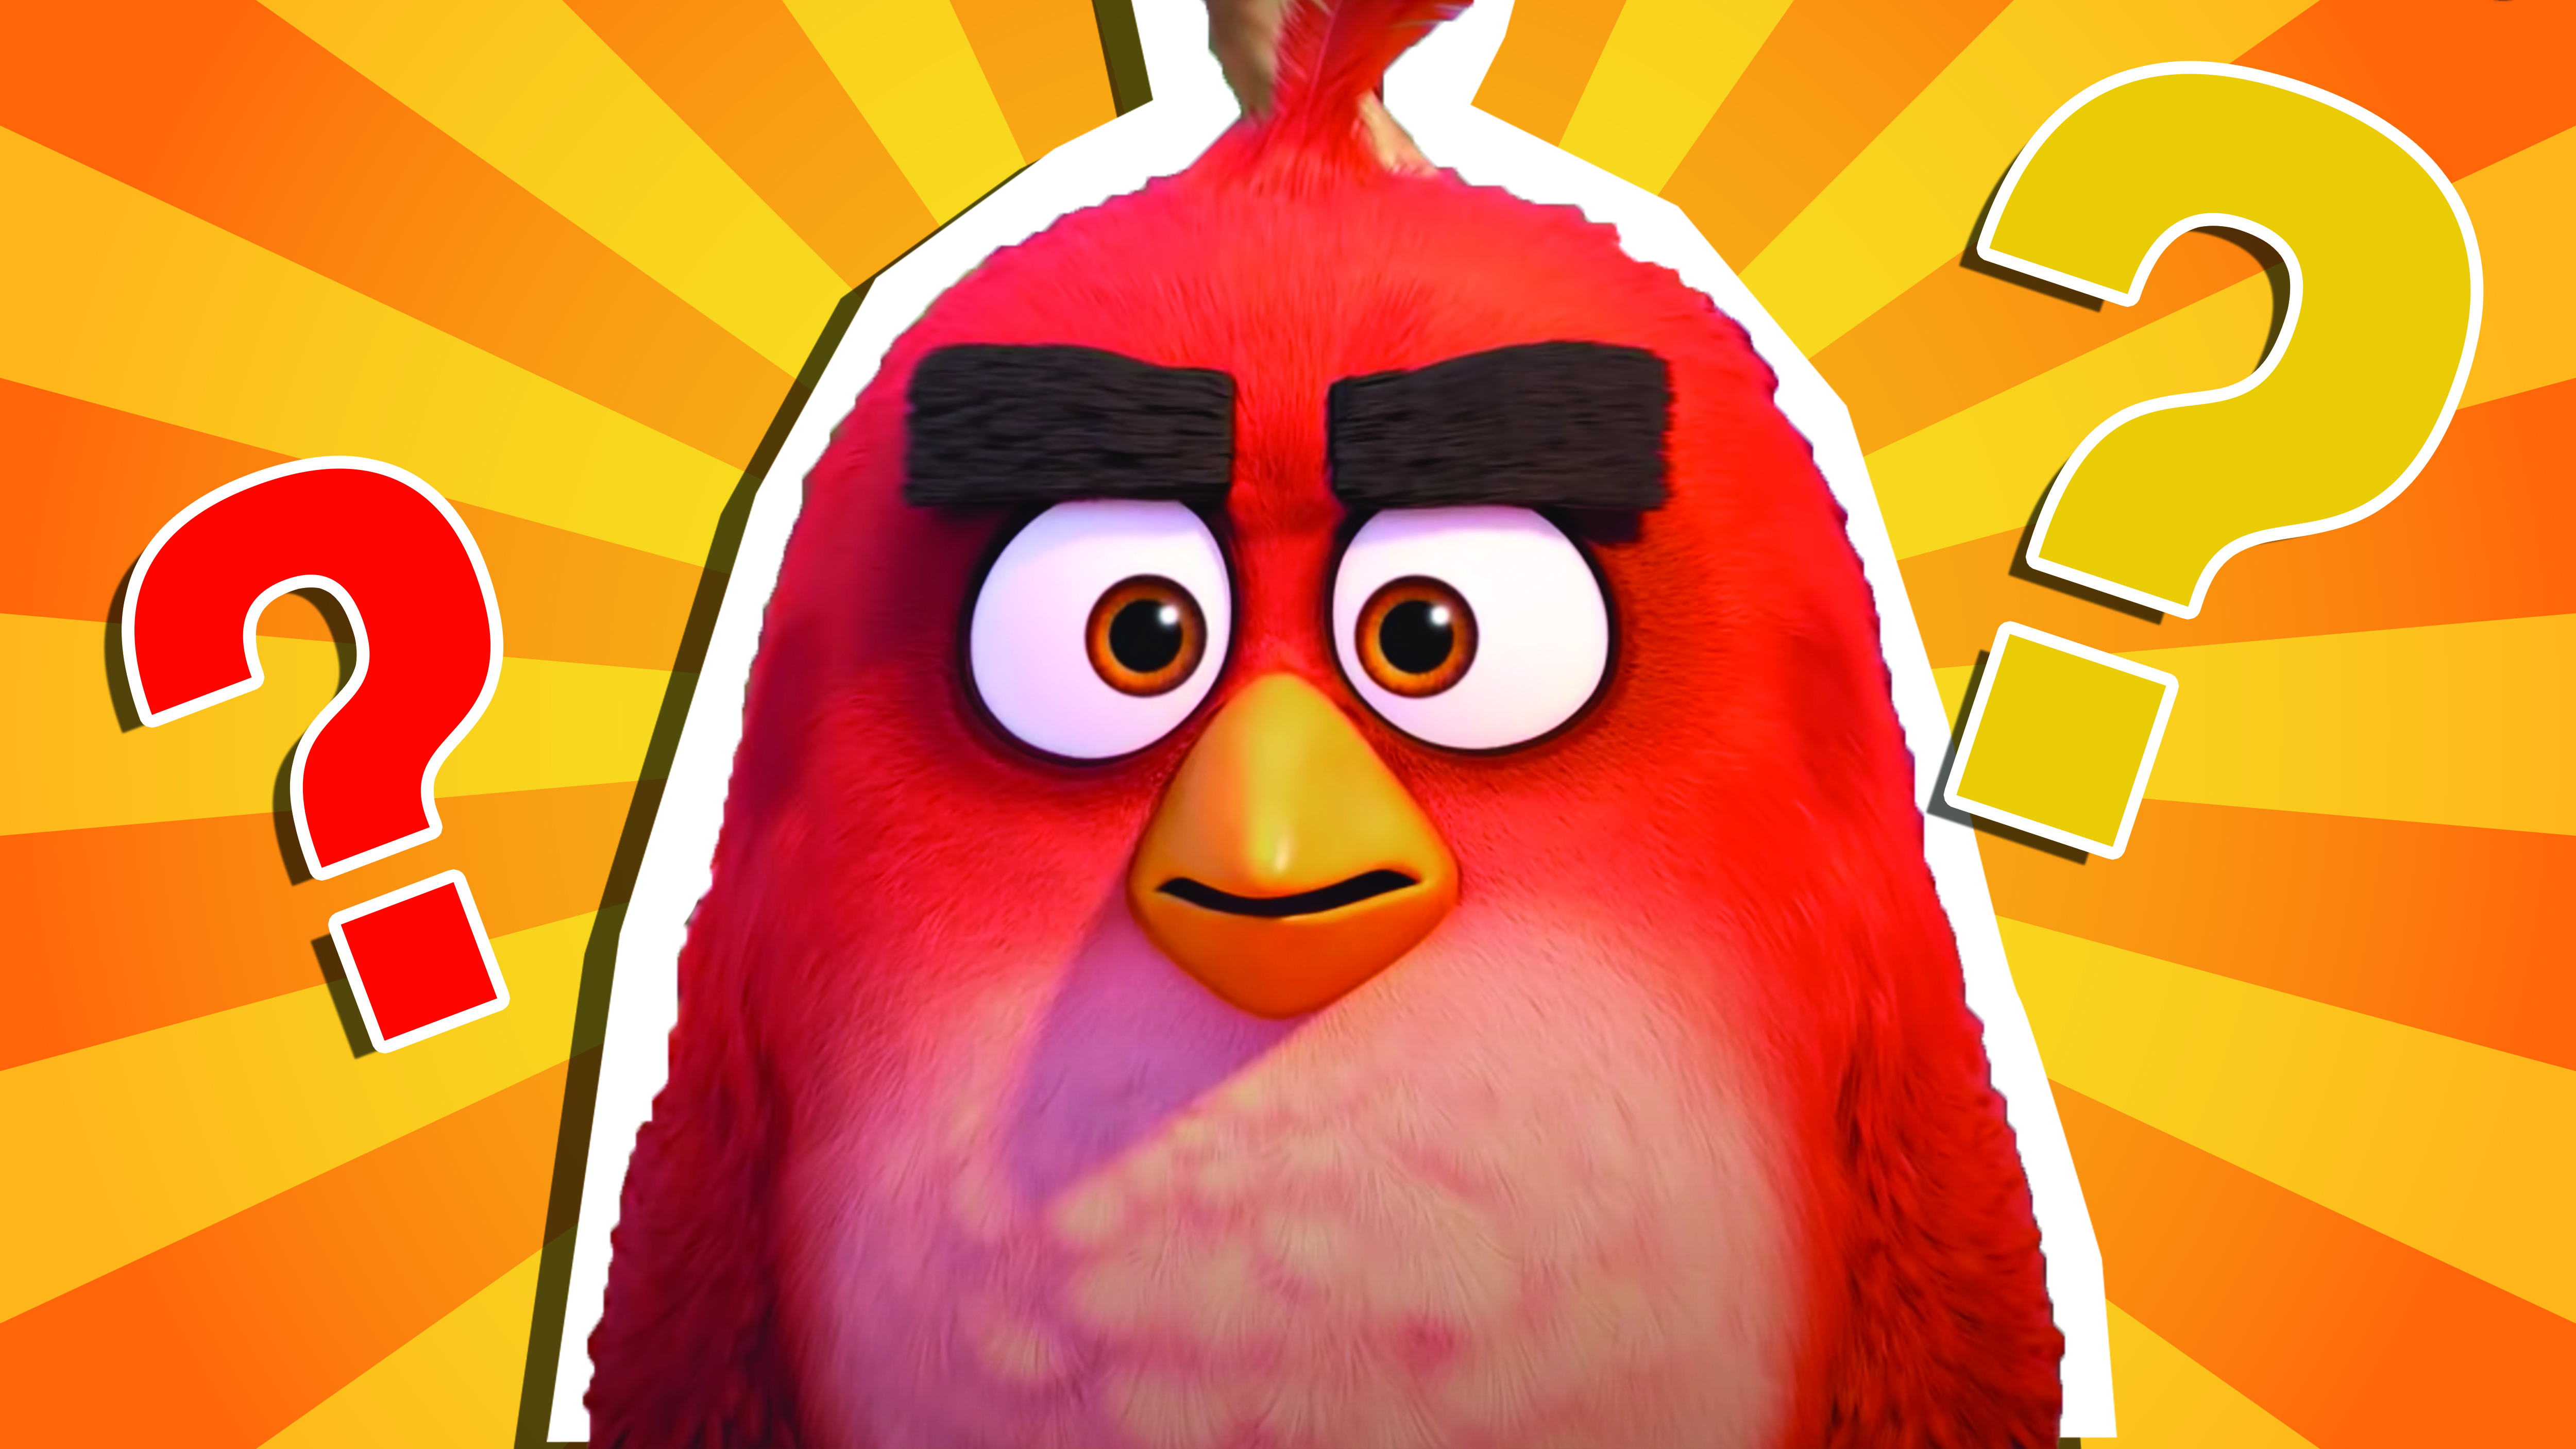 Which Angry Bird Are You?